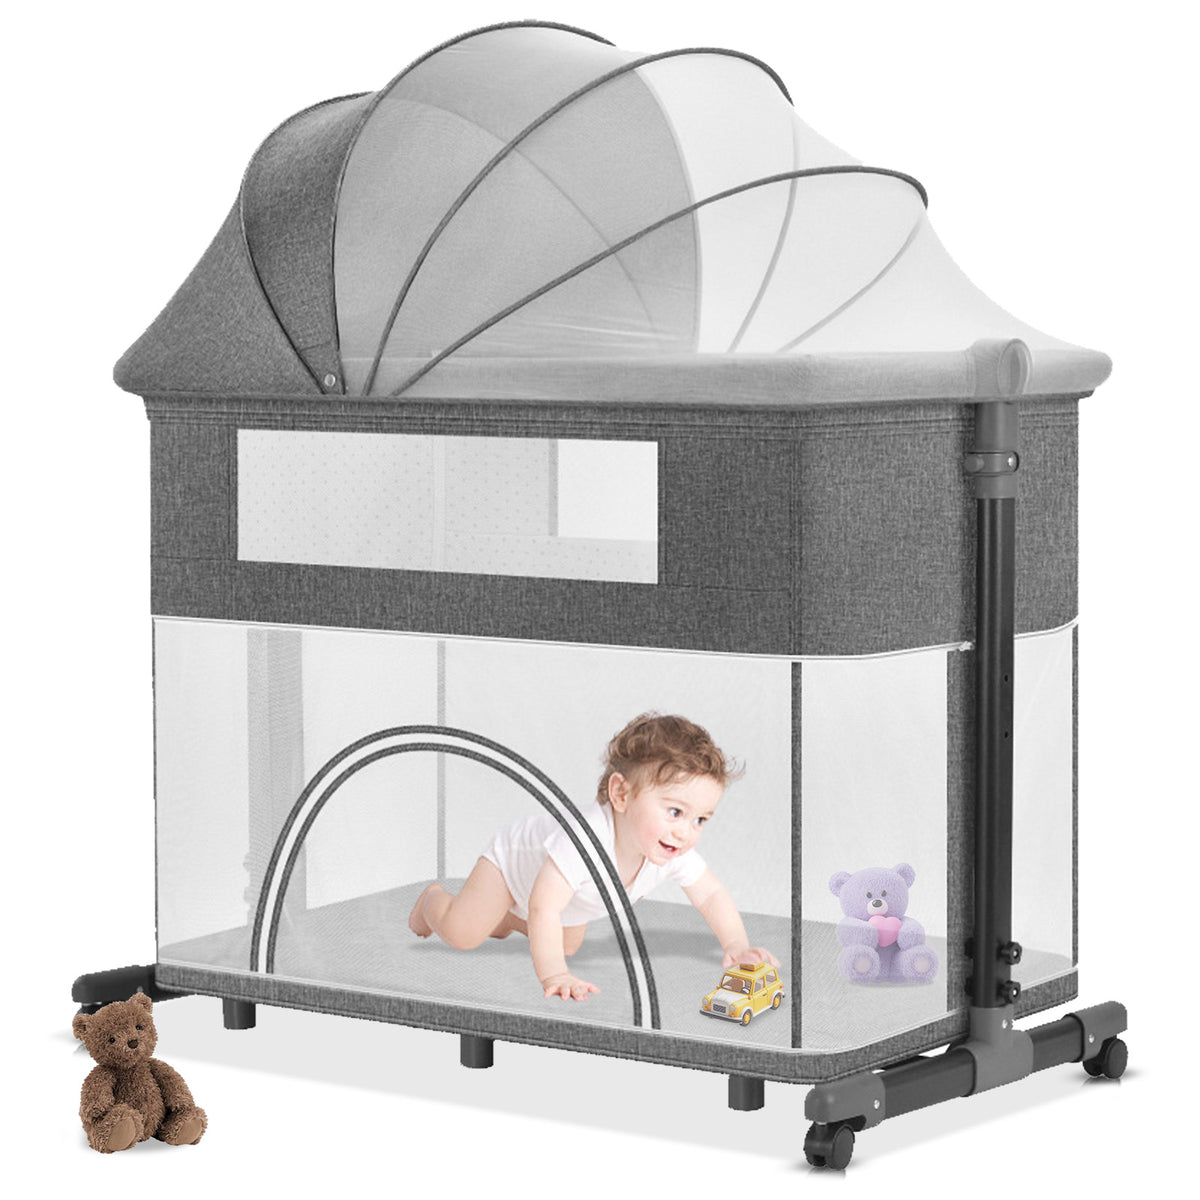 XJD 5 in 1 Baby Bassinet with Mosquito Net, Storage Bag, Adjustable Height, Upgraded Thickened Cushion, Gray